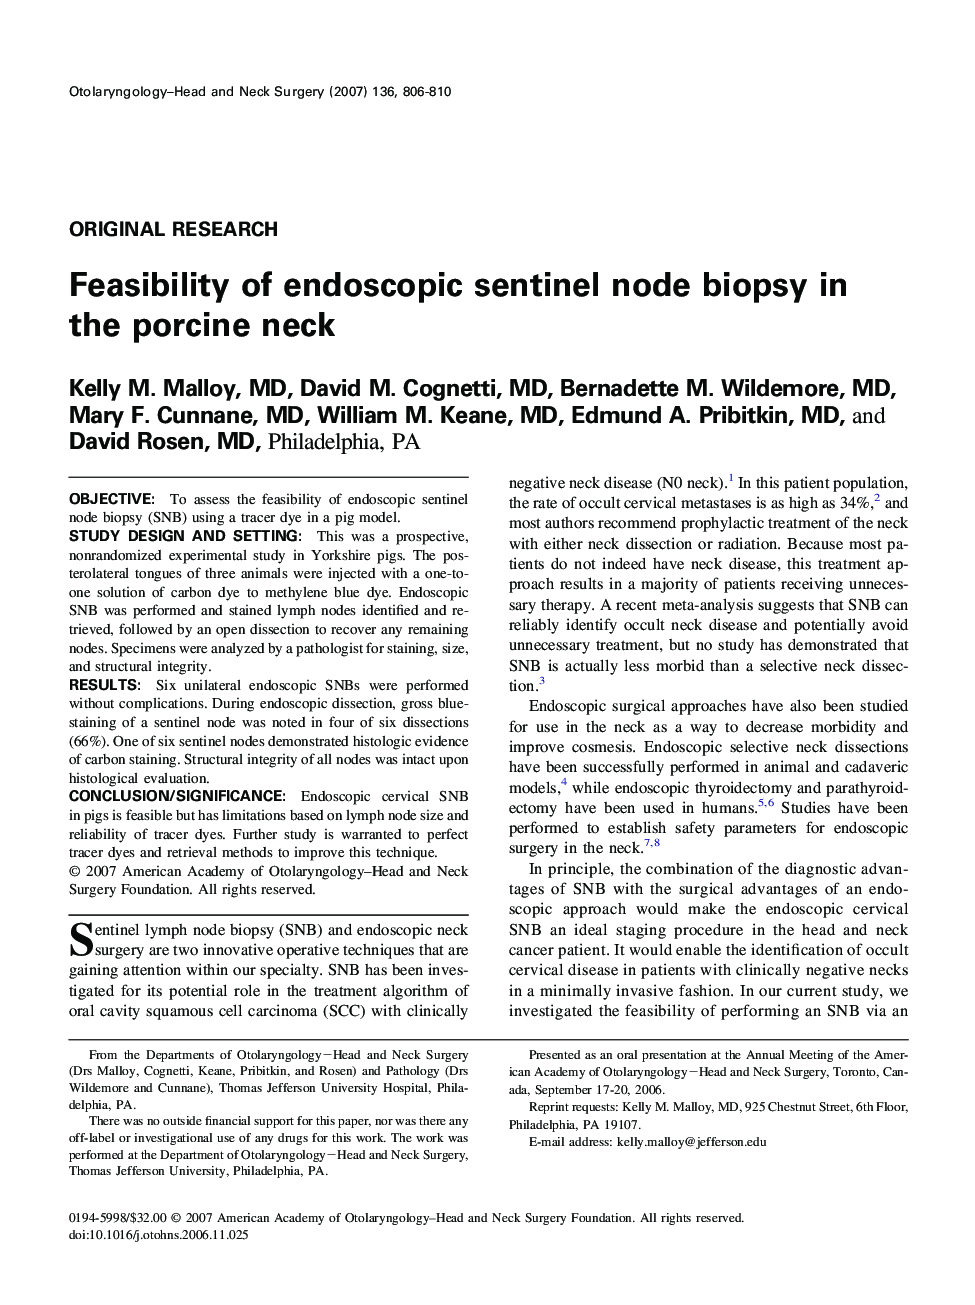 Feasibility of endoscopic sentinel node biopsy in the porcine neck